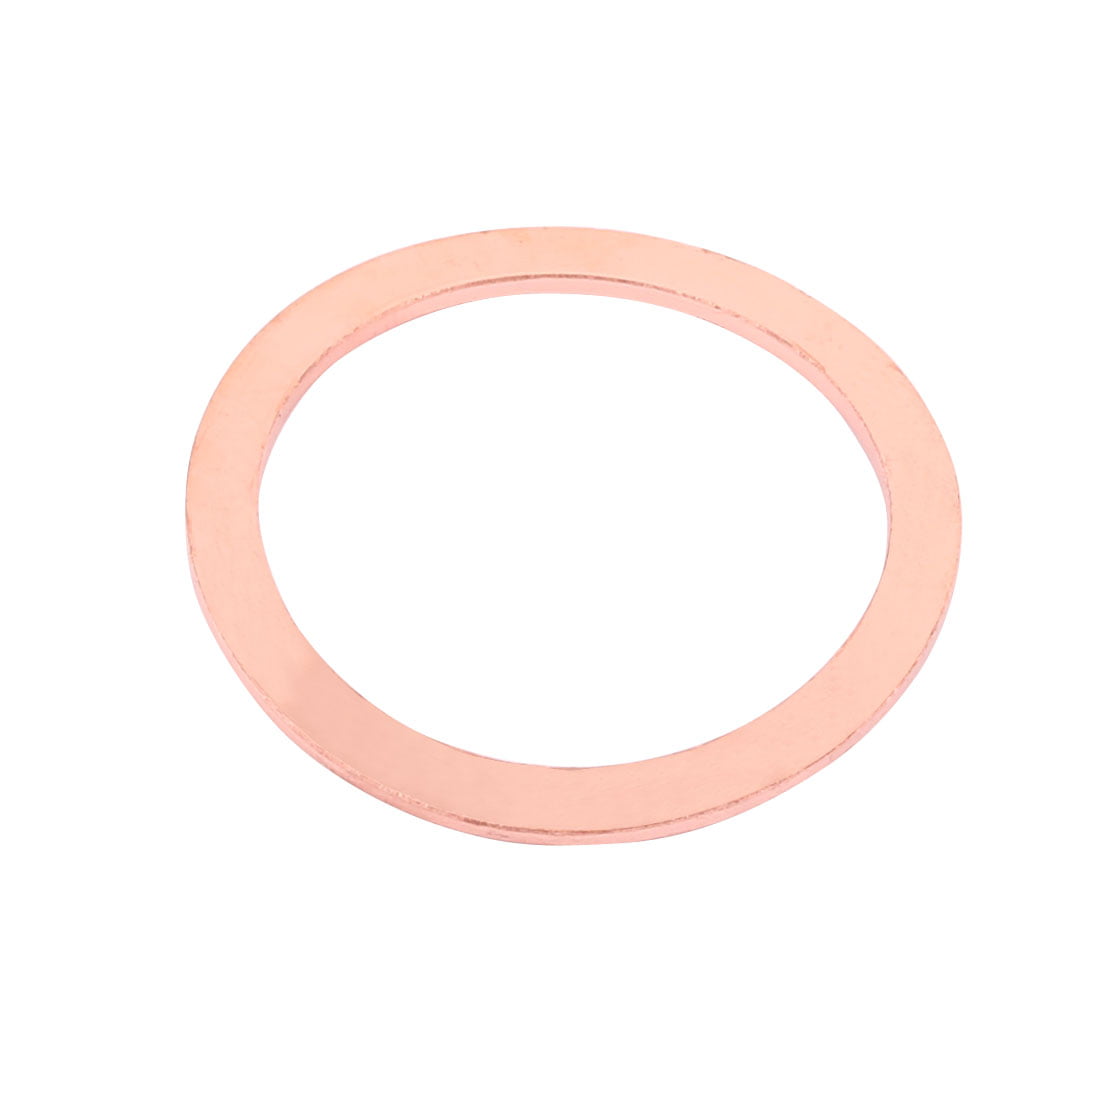 uxcell 10pcs 8mm X 14mm X 1mm Flat Ring Copper Crush Washer Sealing Gasket for sale online 